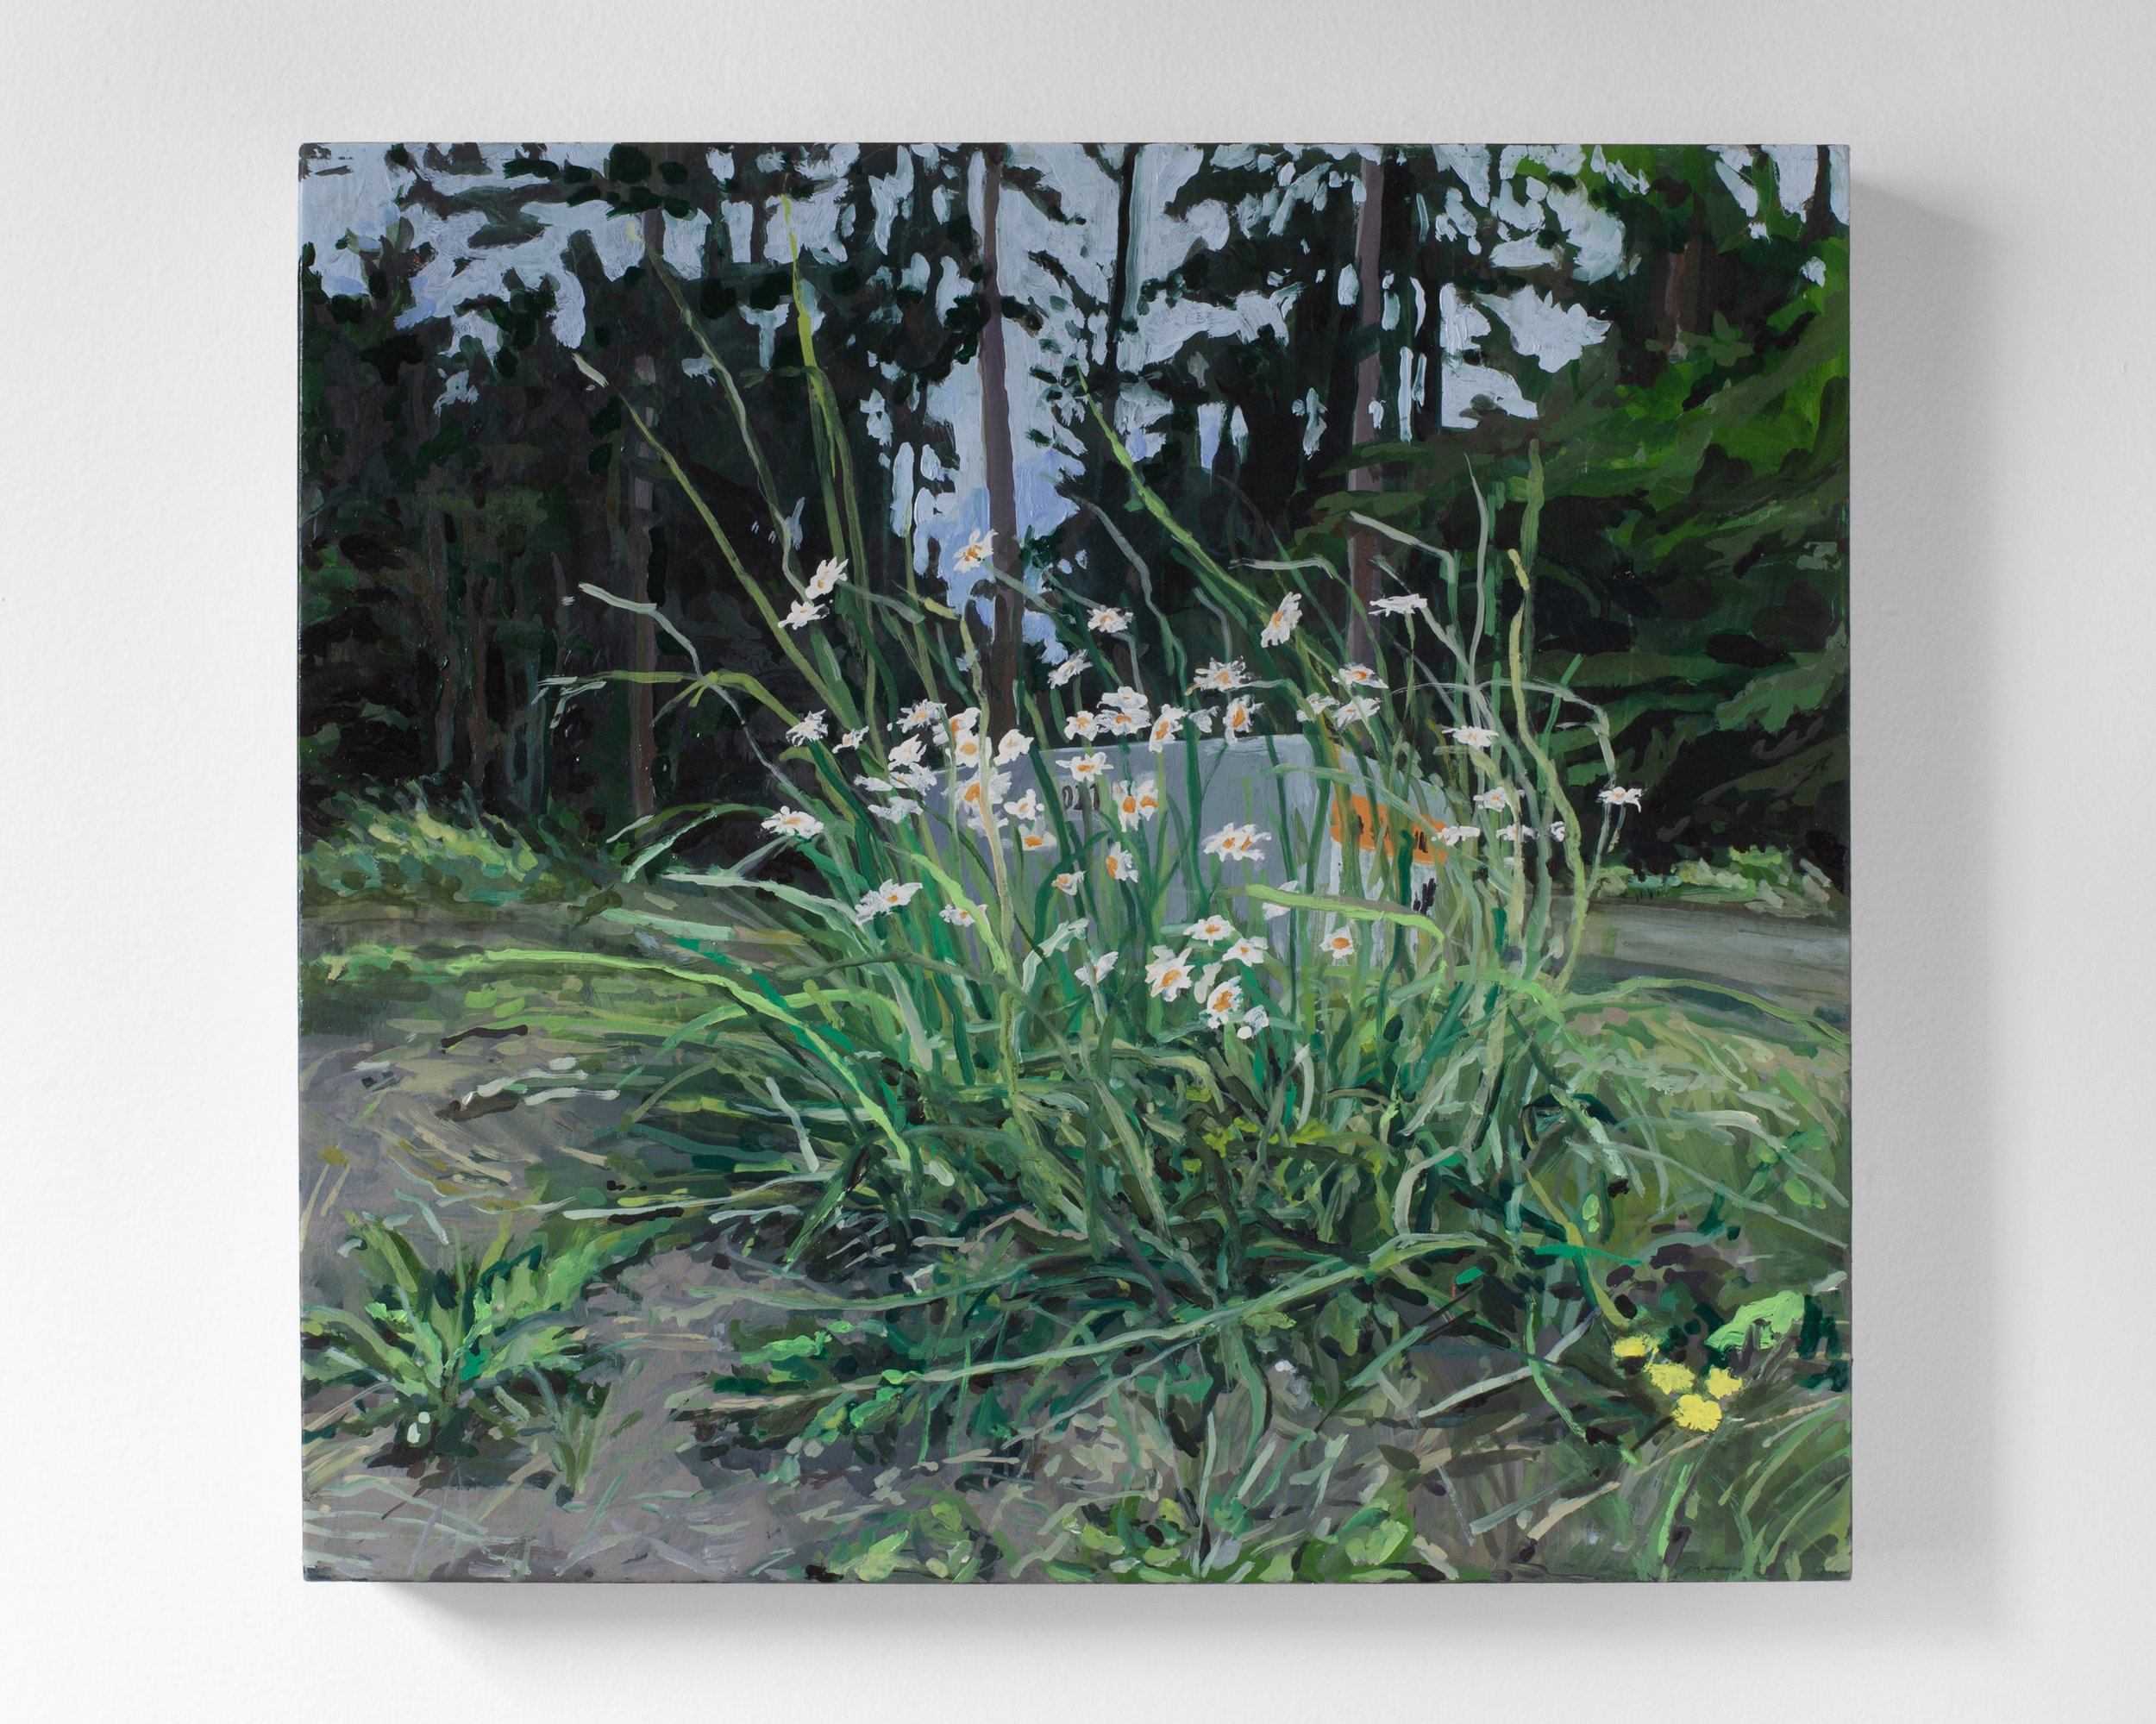   From here, I watched a man mow concentric circles out of the tall grass until it was all clipped short,  oil on panel, 14 × 15” 